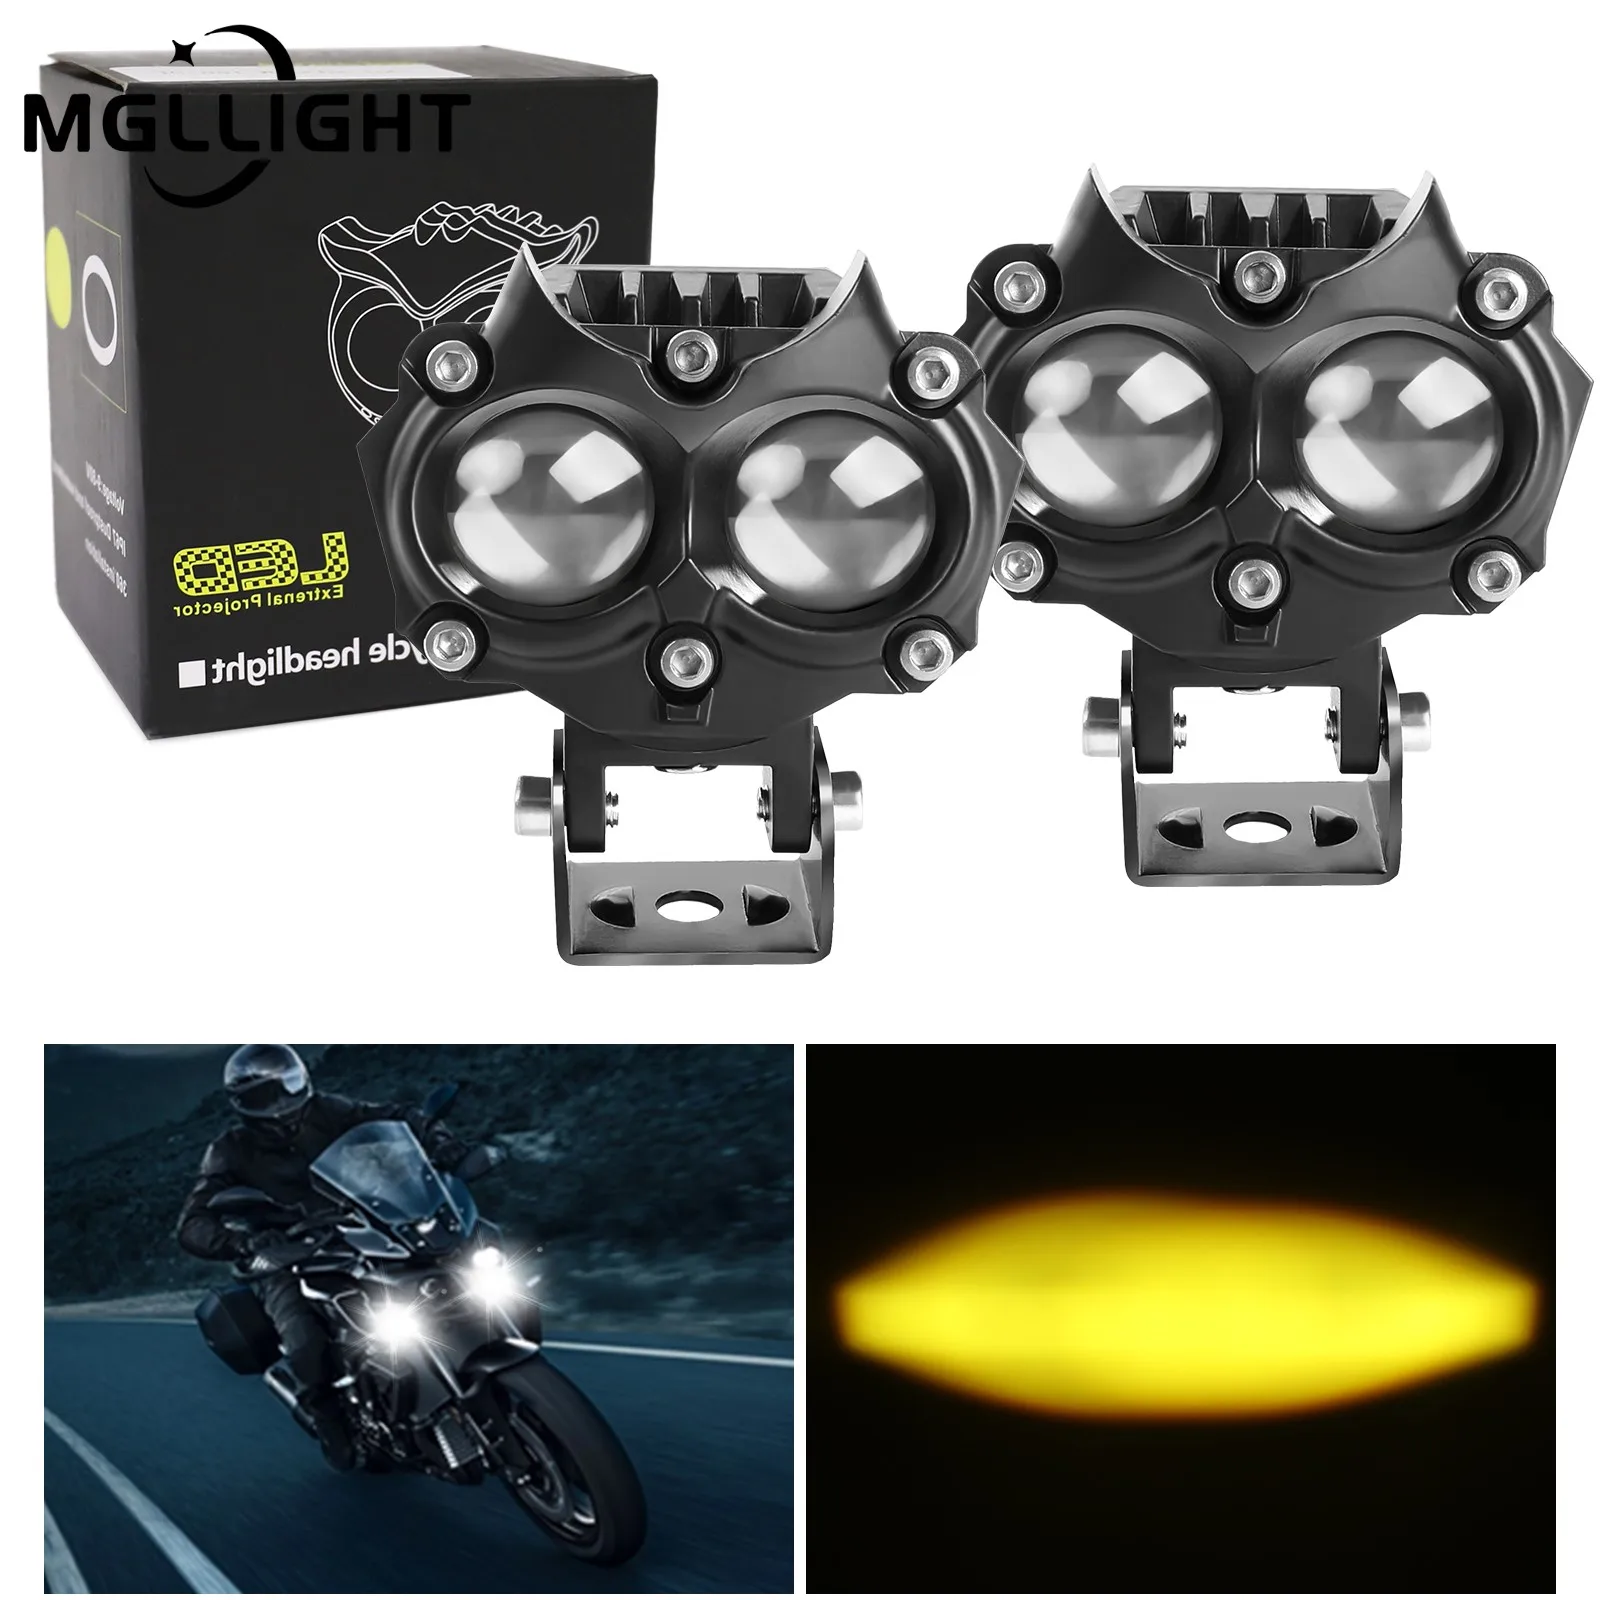 

MGLLIGHT 16000LM LED Spotlight Dual Color Motorcycle LED Moto Headlights Auxiliary Lamp IP68 6000K 3000K High and Low Beam